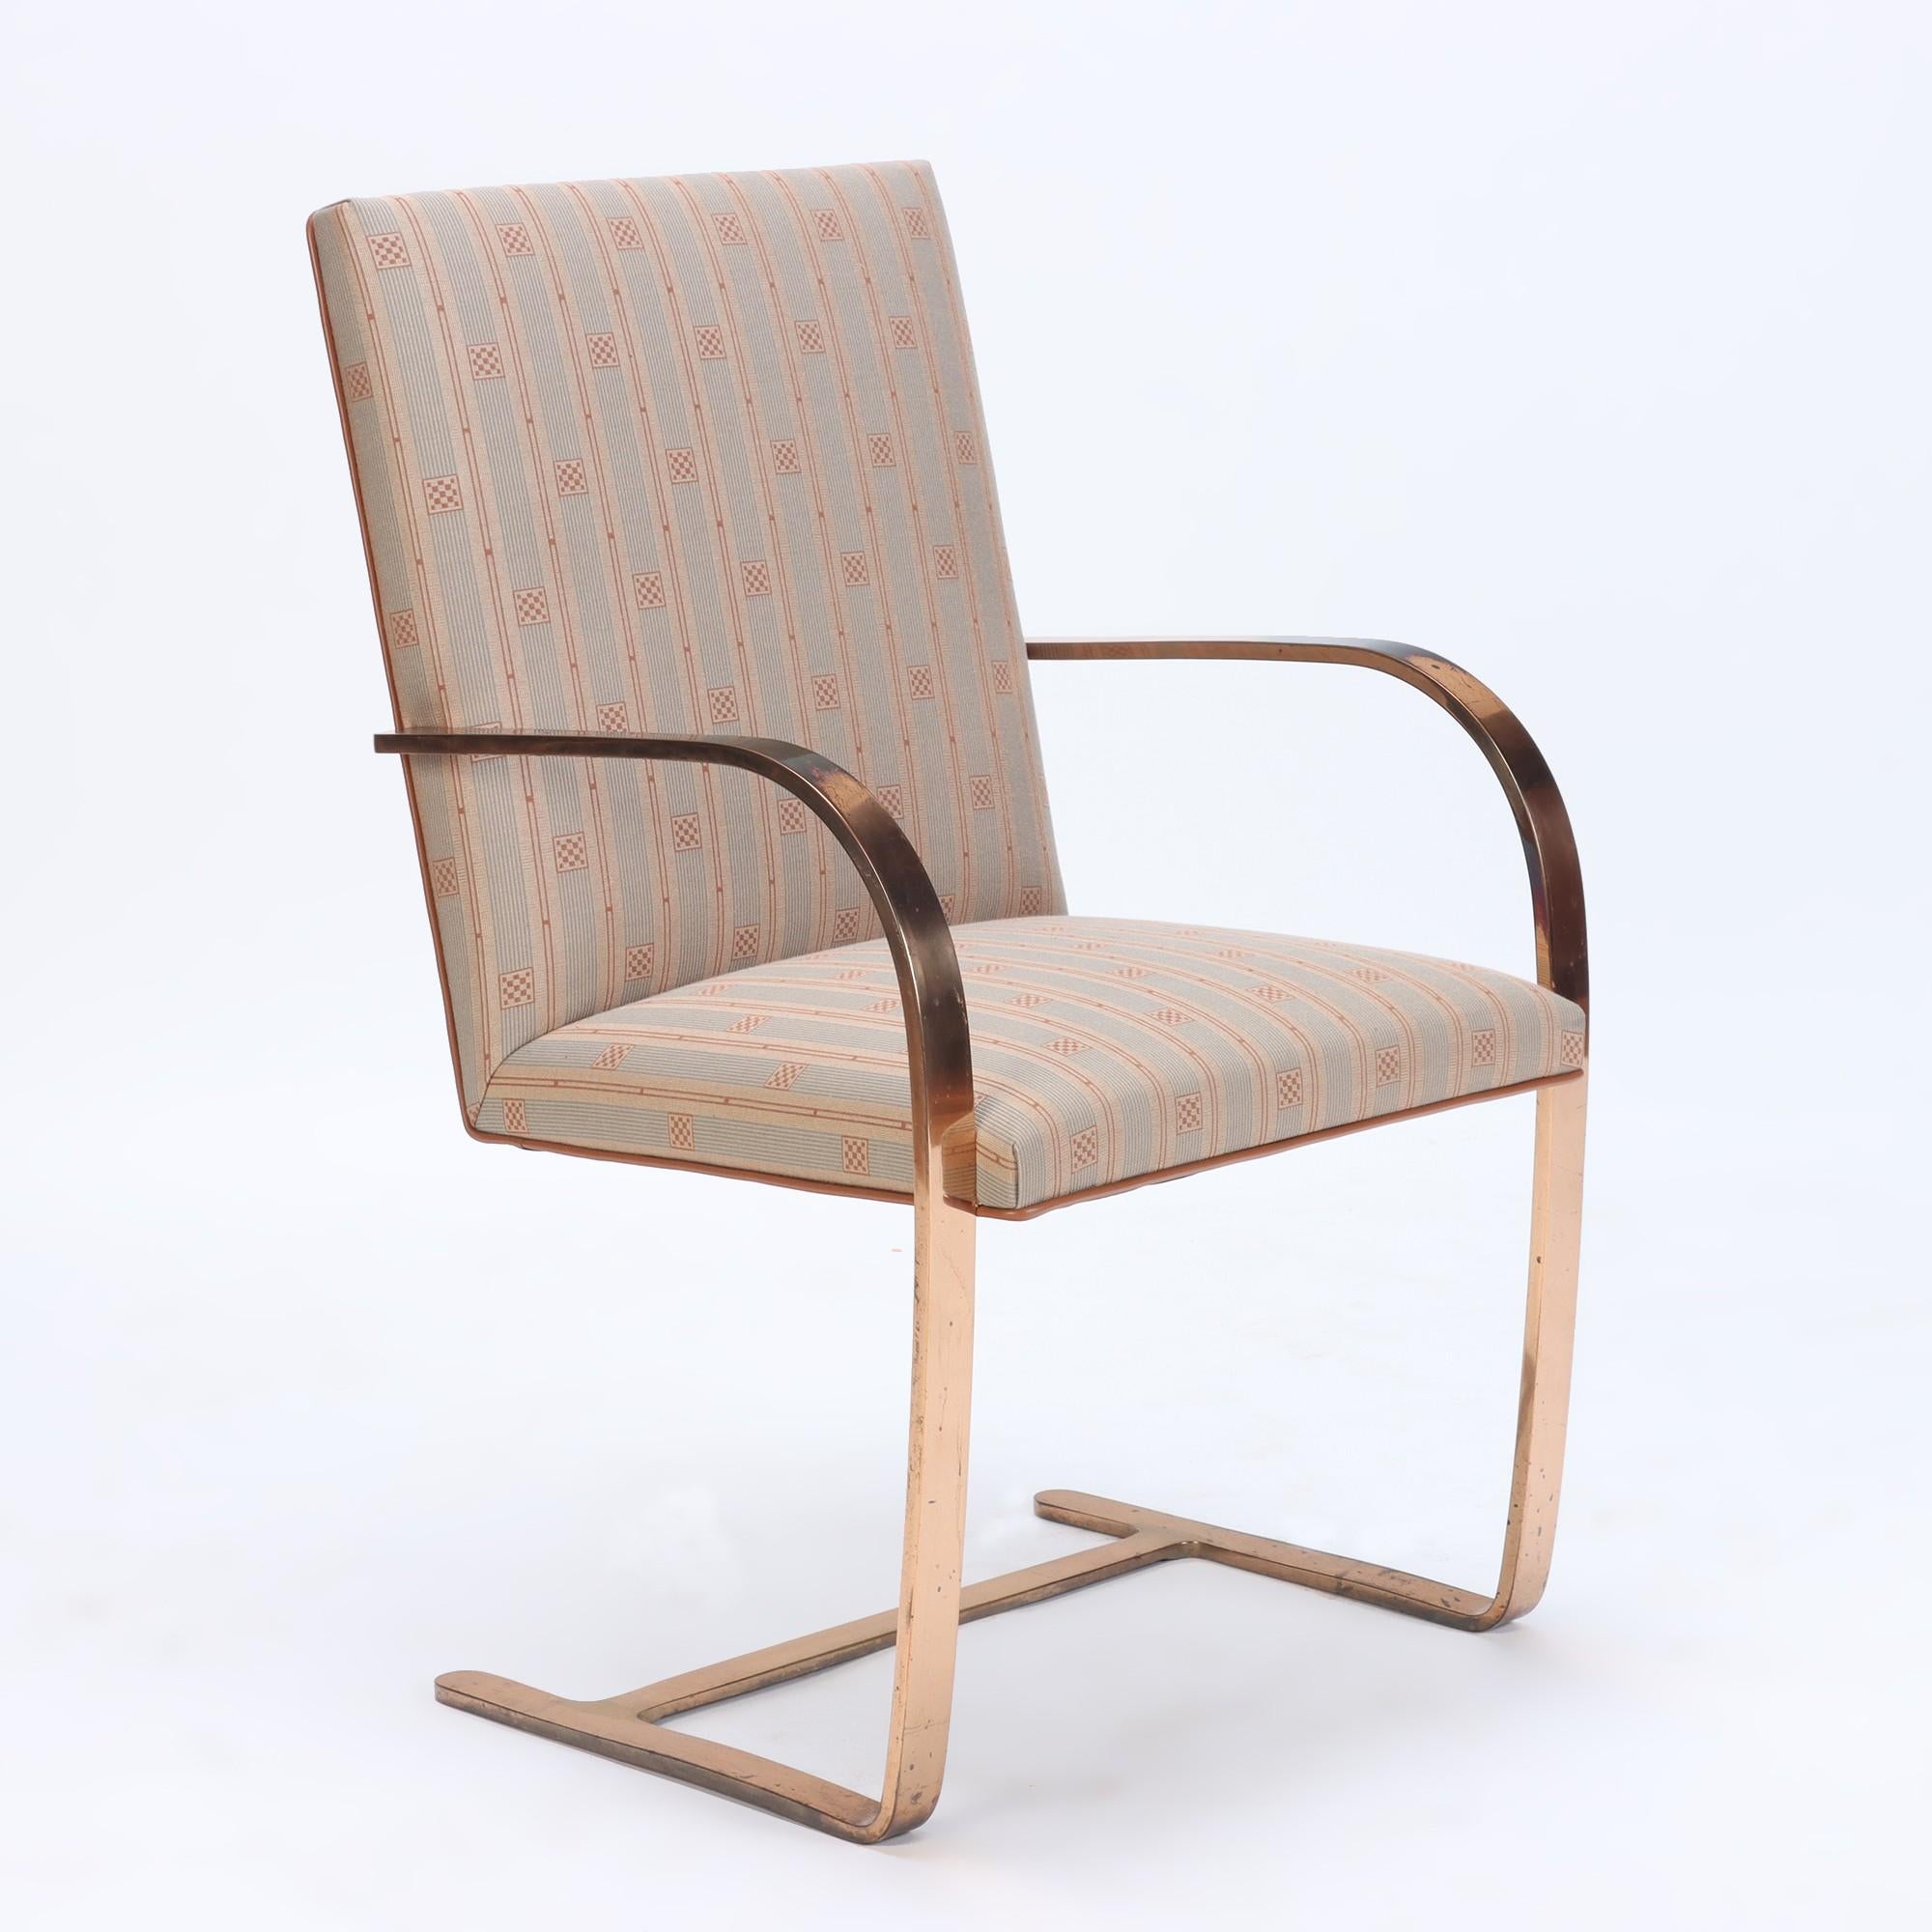 A rare vintage high back Brno chair with original bronze flat bar frame, Mid Century. Herman Miller Mid Century Modern fabric and leather welting.